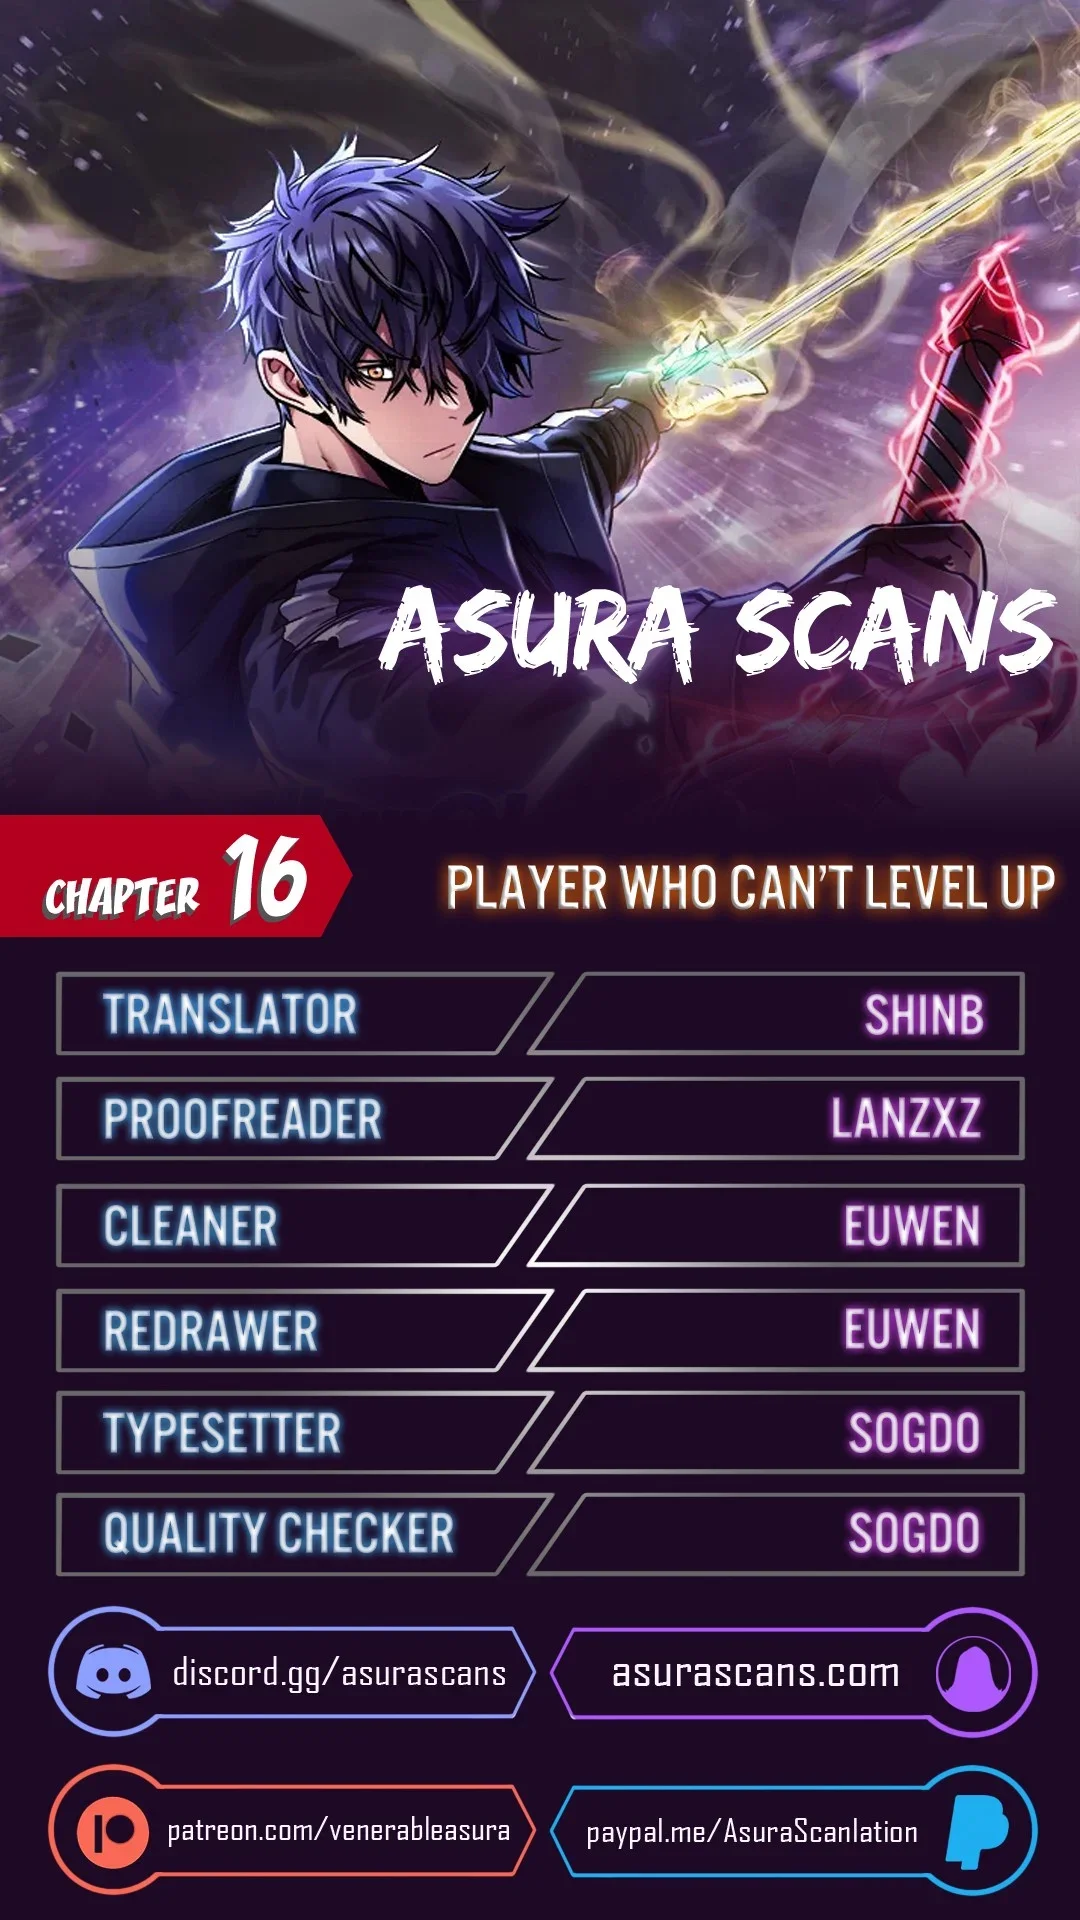 player-who-cant-level-up-chap-16-0